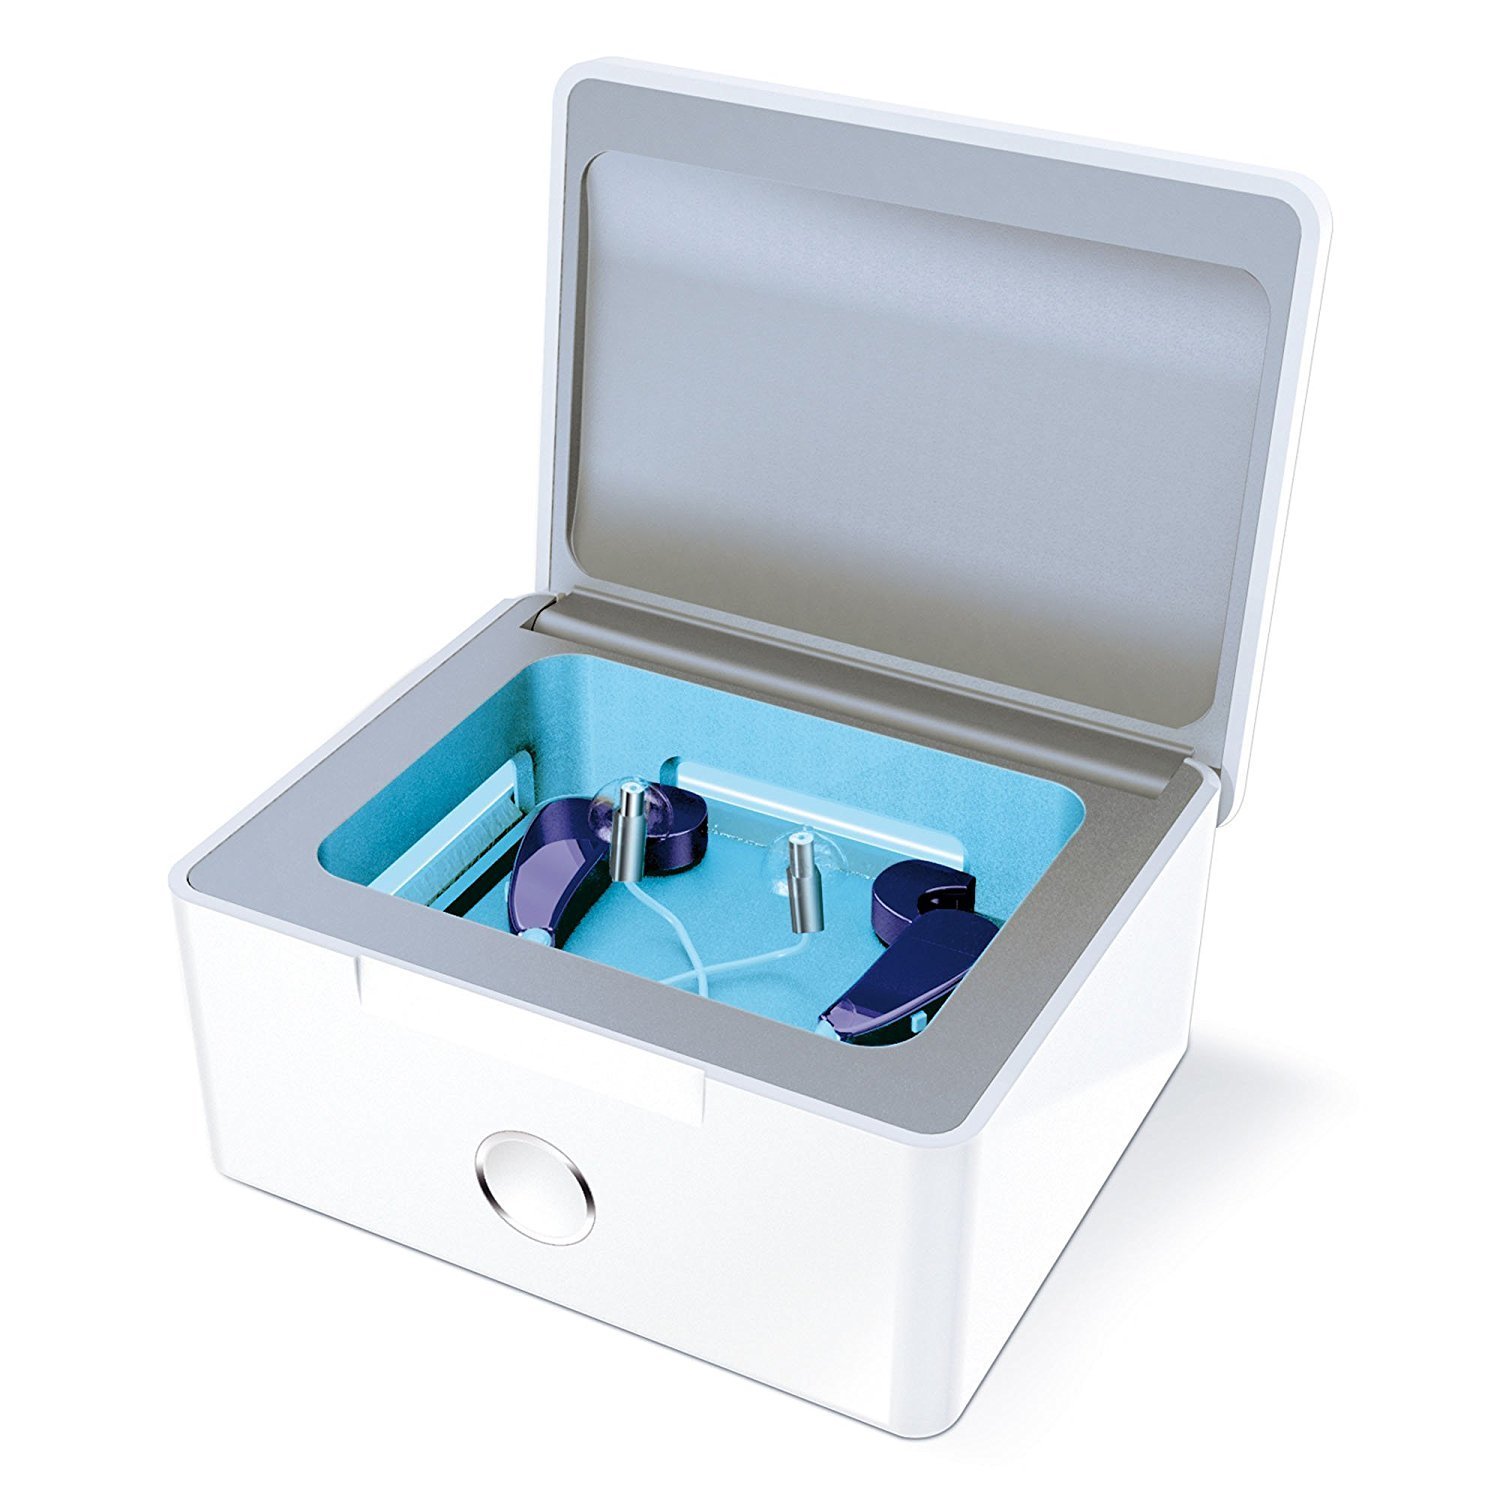 Hearing Aid Dryer Drying Box Dehumidifier Case Protect Hearing Aid And Cochlear With Uv Light Cleani - Ruixing Electronics Co. LTD - ecplaza.net